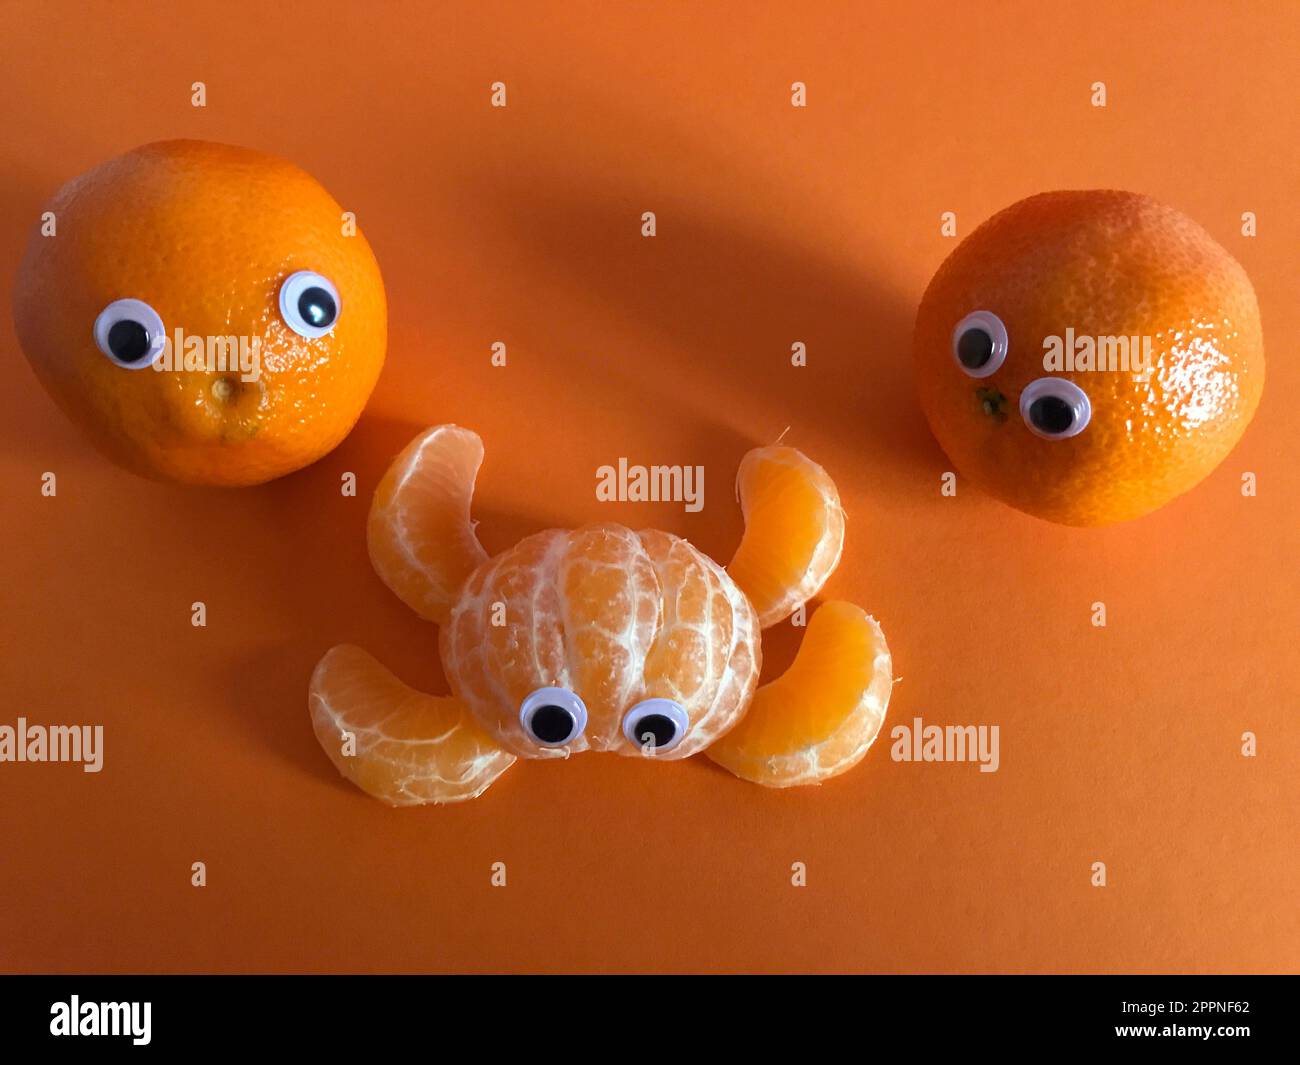 Creative funny food concept. Two googly eyed oranges looking at peeled orange segments in abstract animal shape with eyes Stock Photo